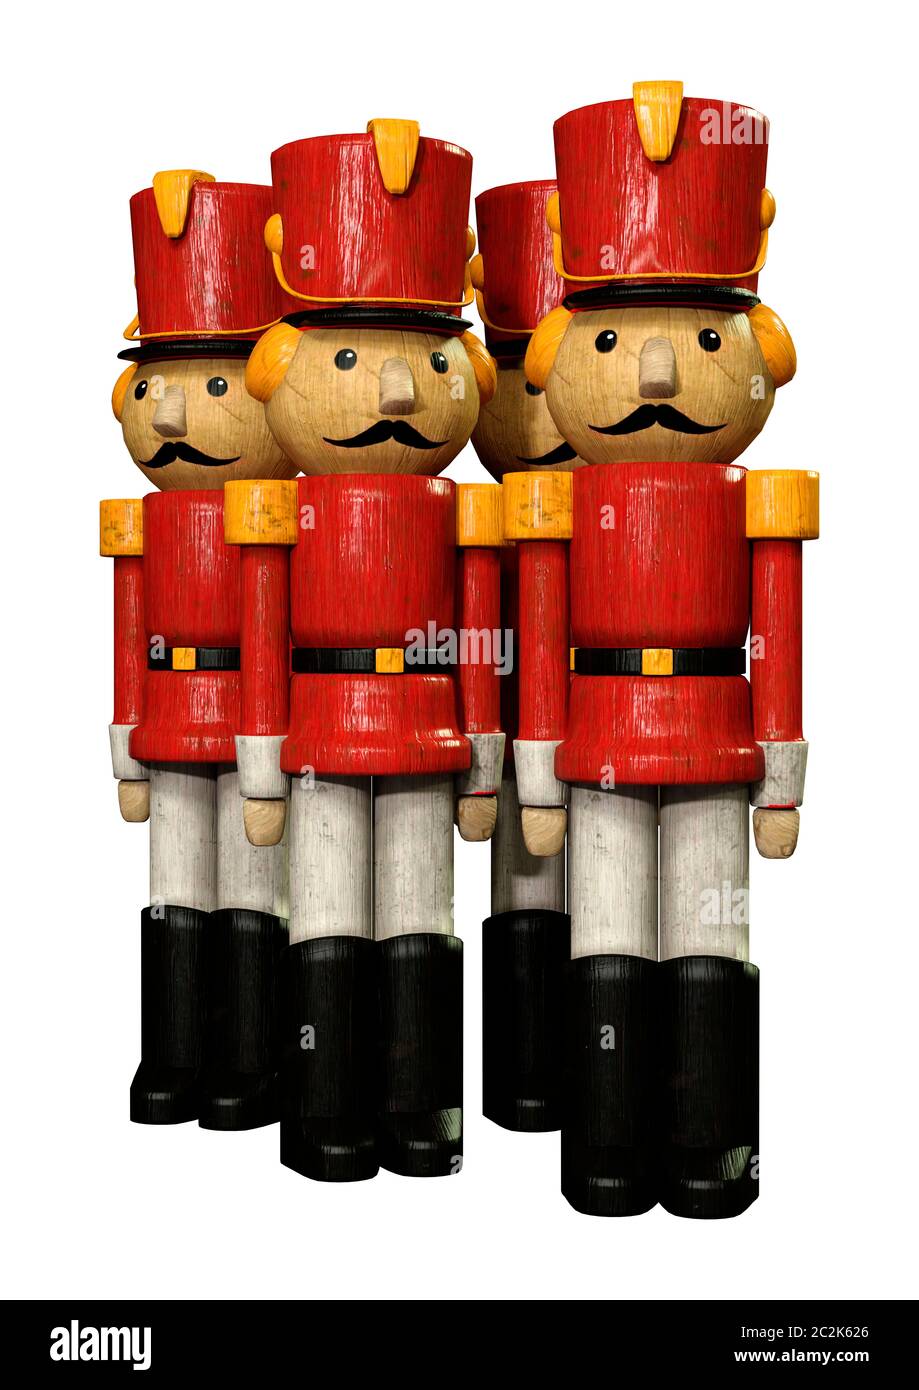 3D rendering of toy soldiers isolated on white background Stock Photo